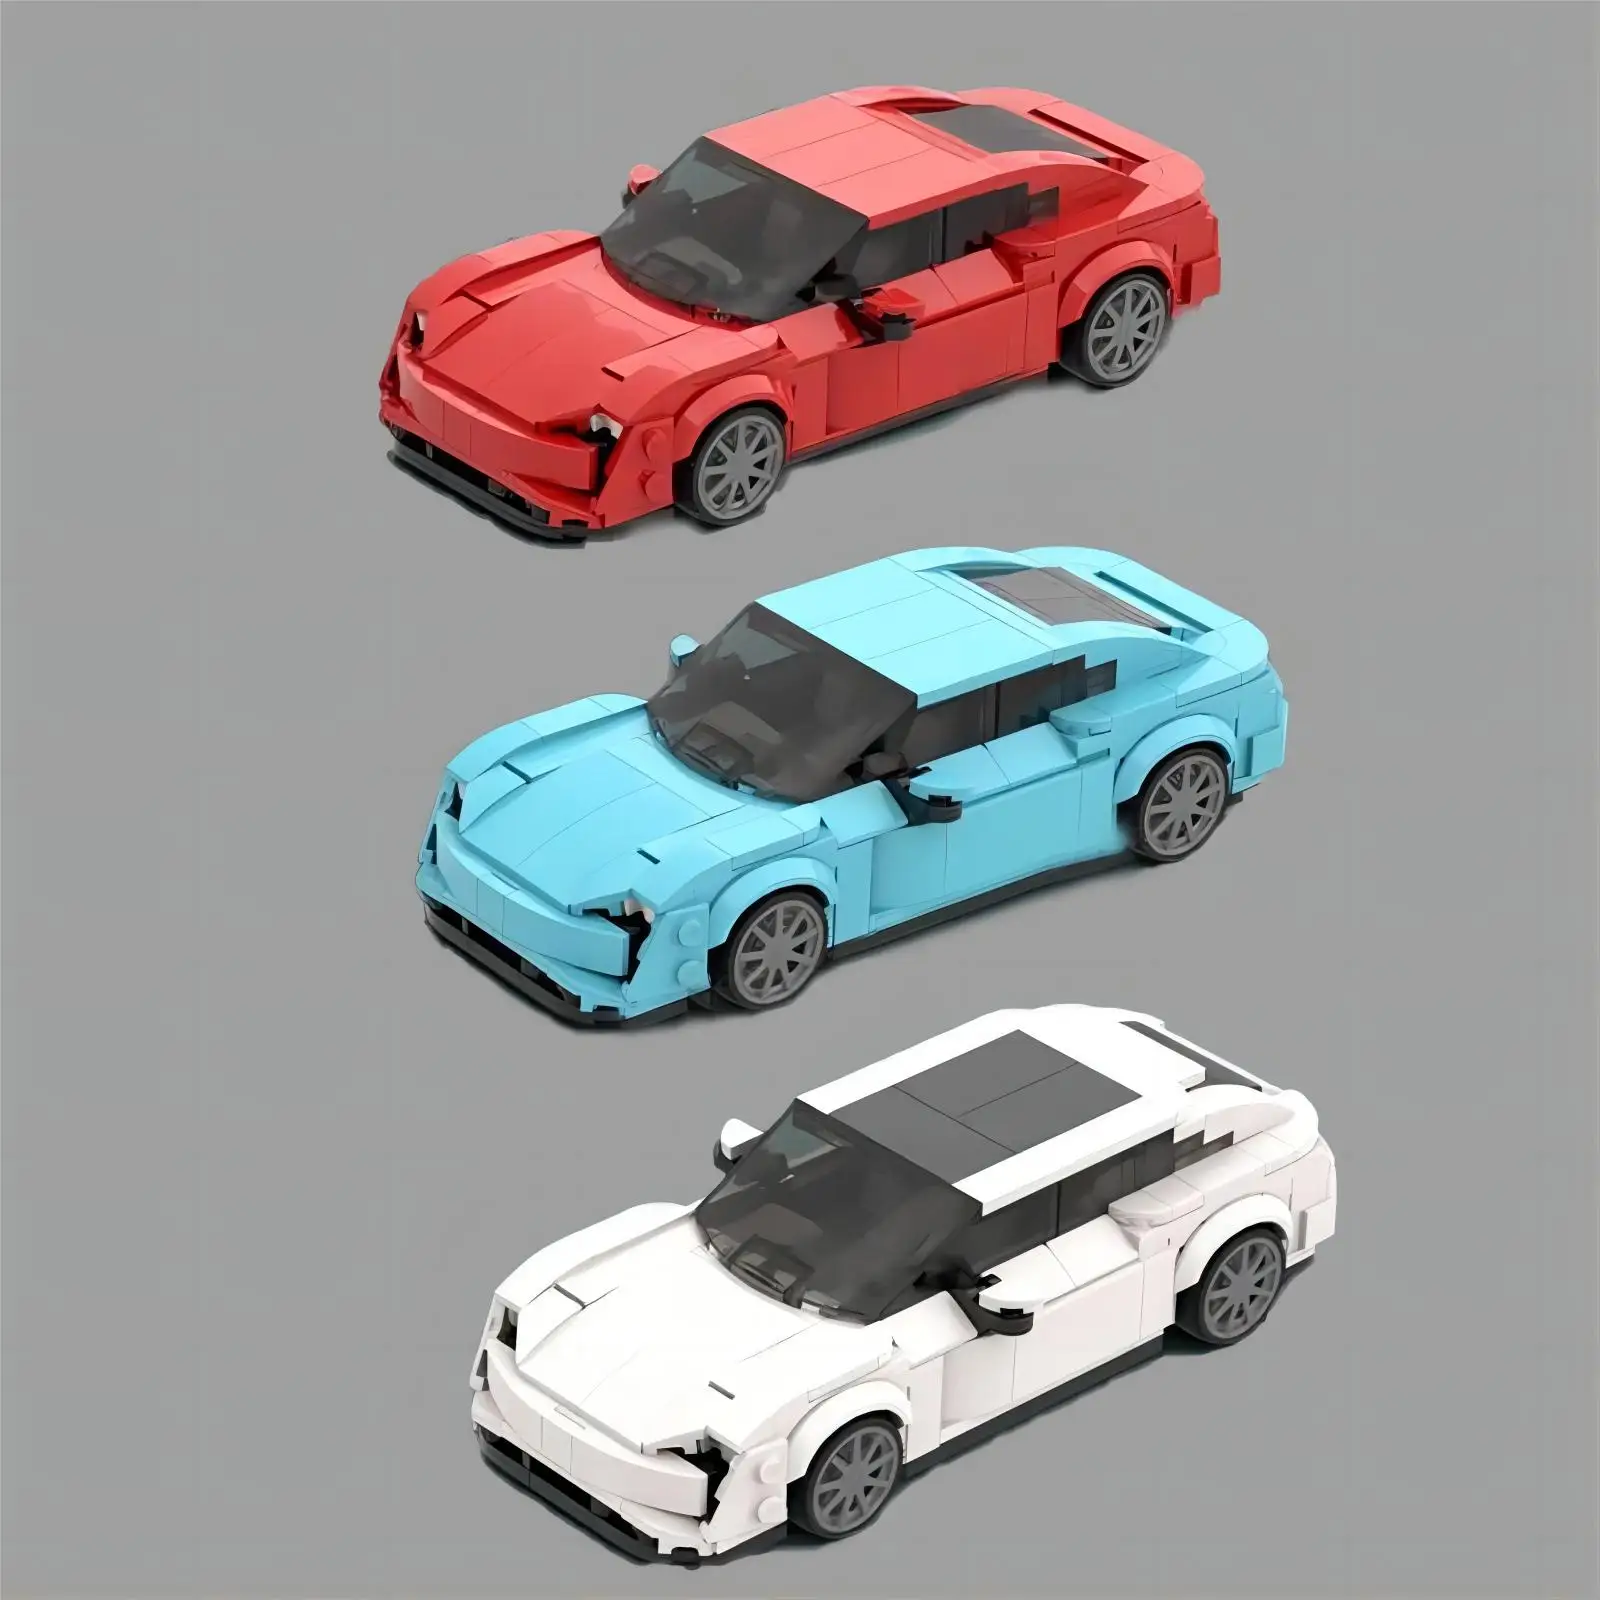 

Champion Speed Cars Sets Moc Building Blocks Three Forms City Car Model Technology Bricks DIY Assembly Construction Toy Gifts